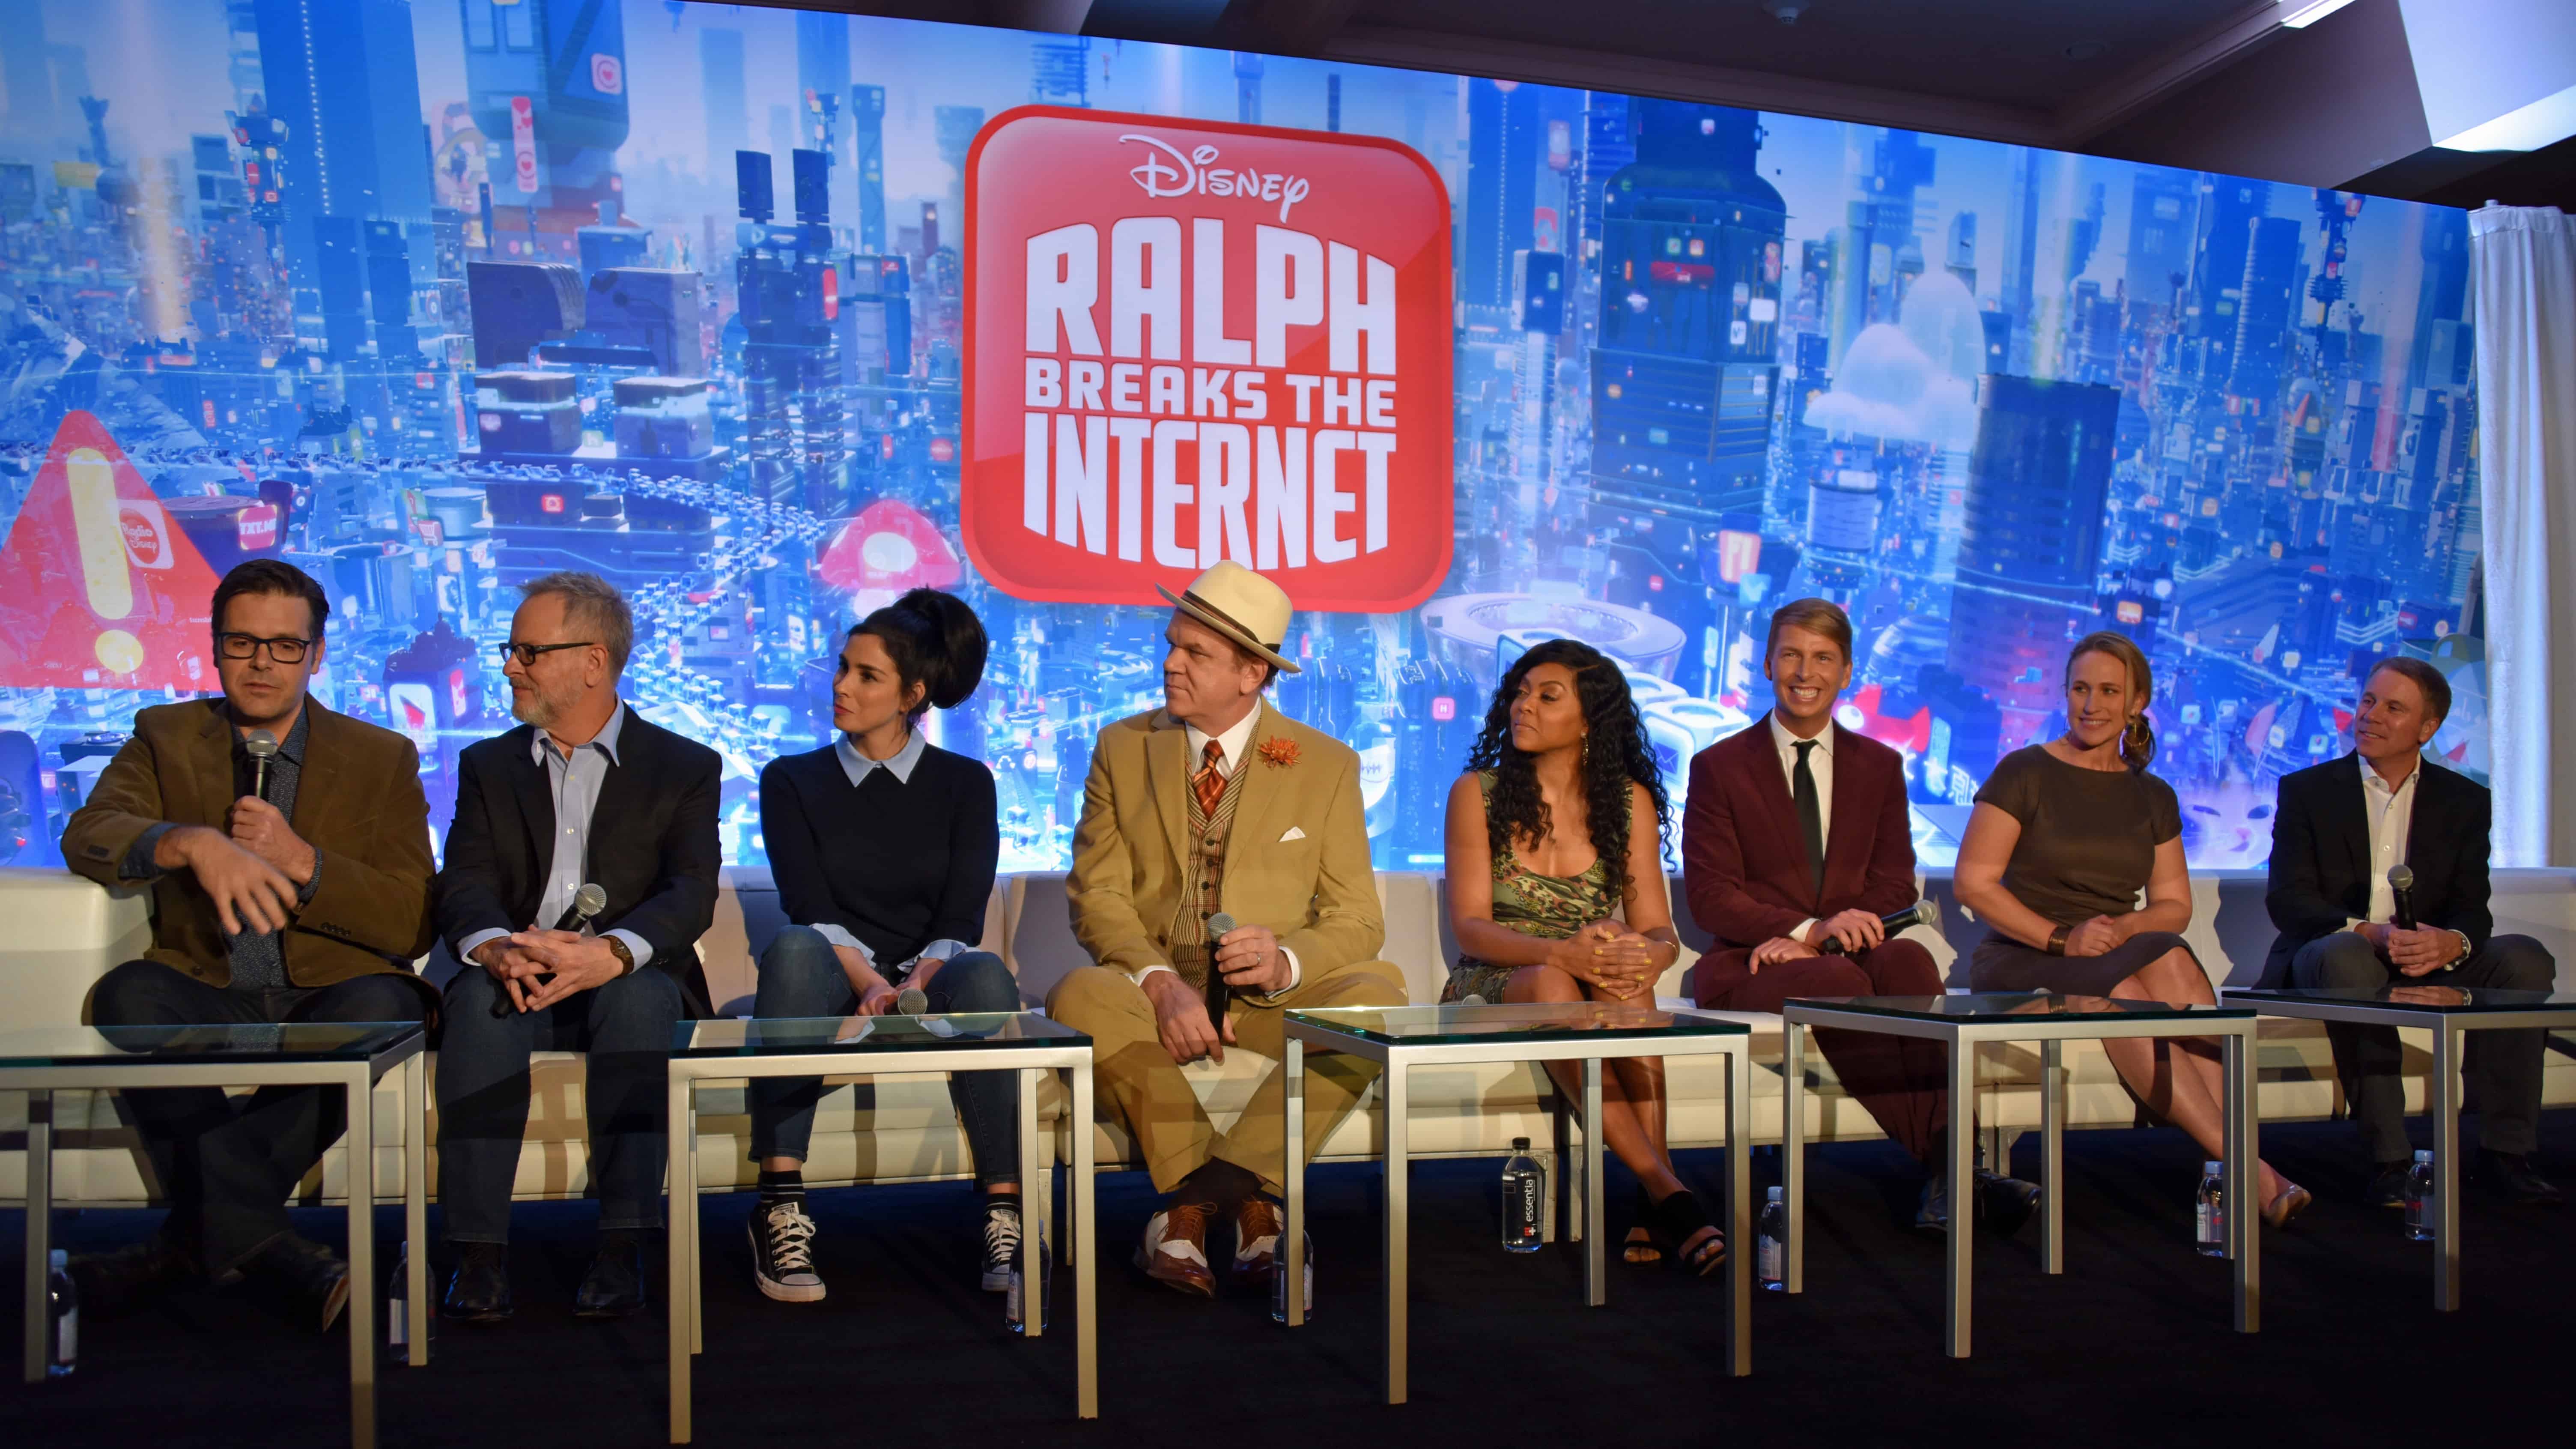 Ralph Breaks the Internet Cast Interview: In Theaters November 21